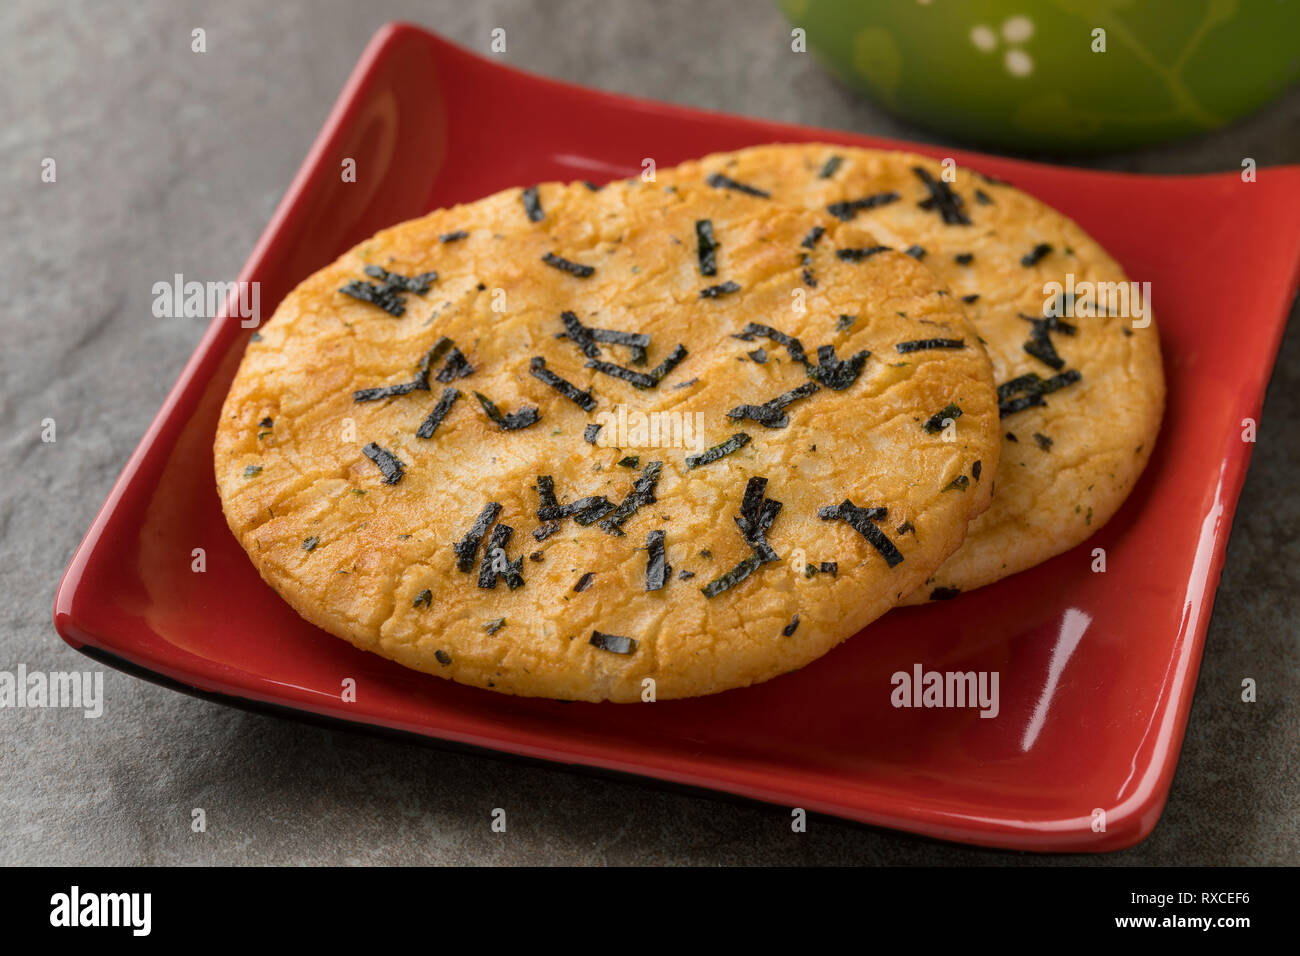 Dish with traditional Japanese rice crackers and nori seaweed Stock Photo